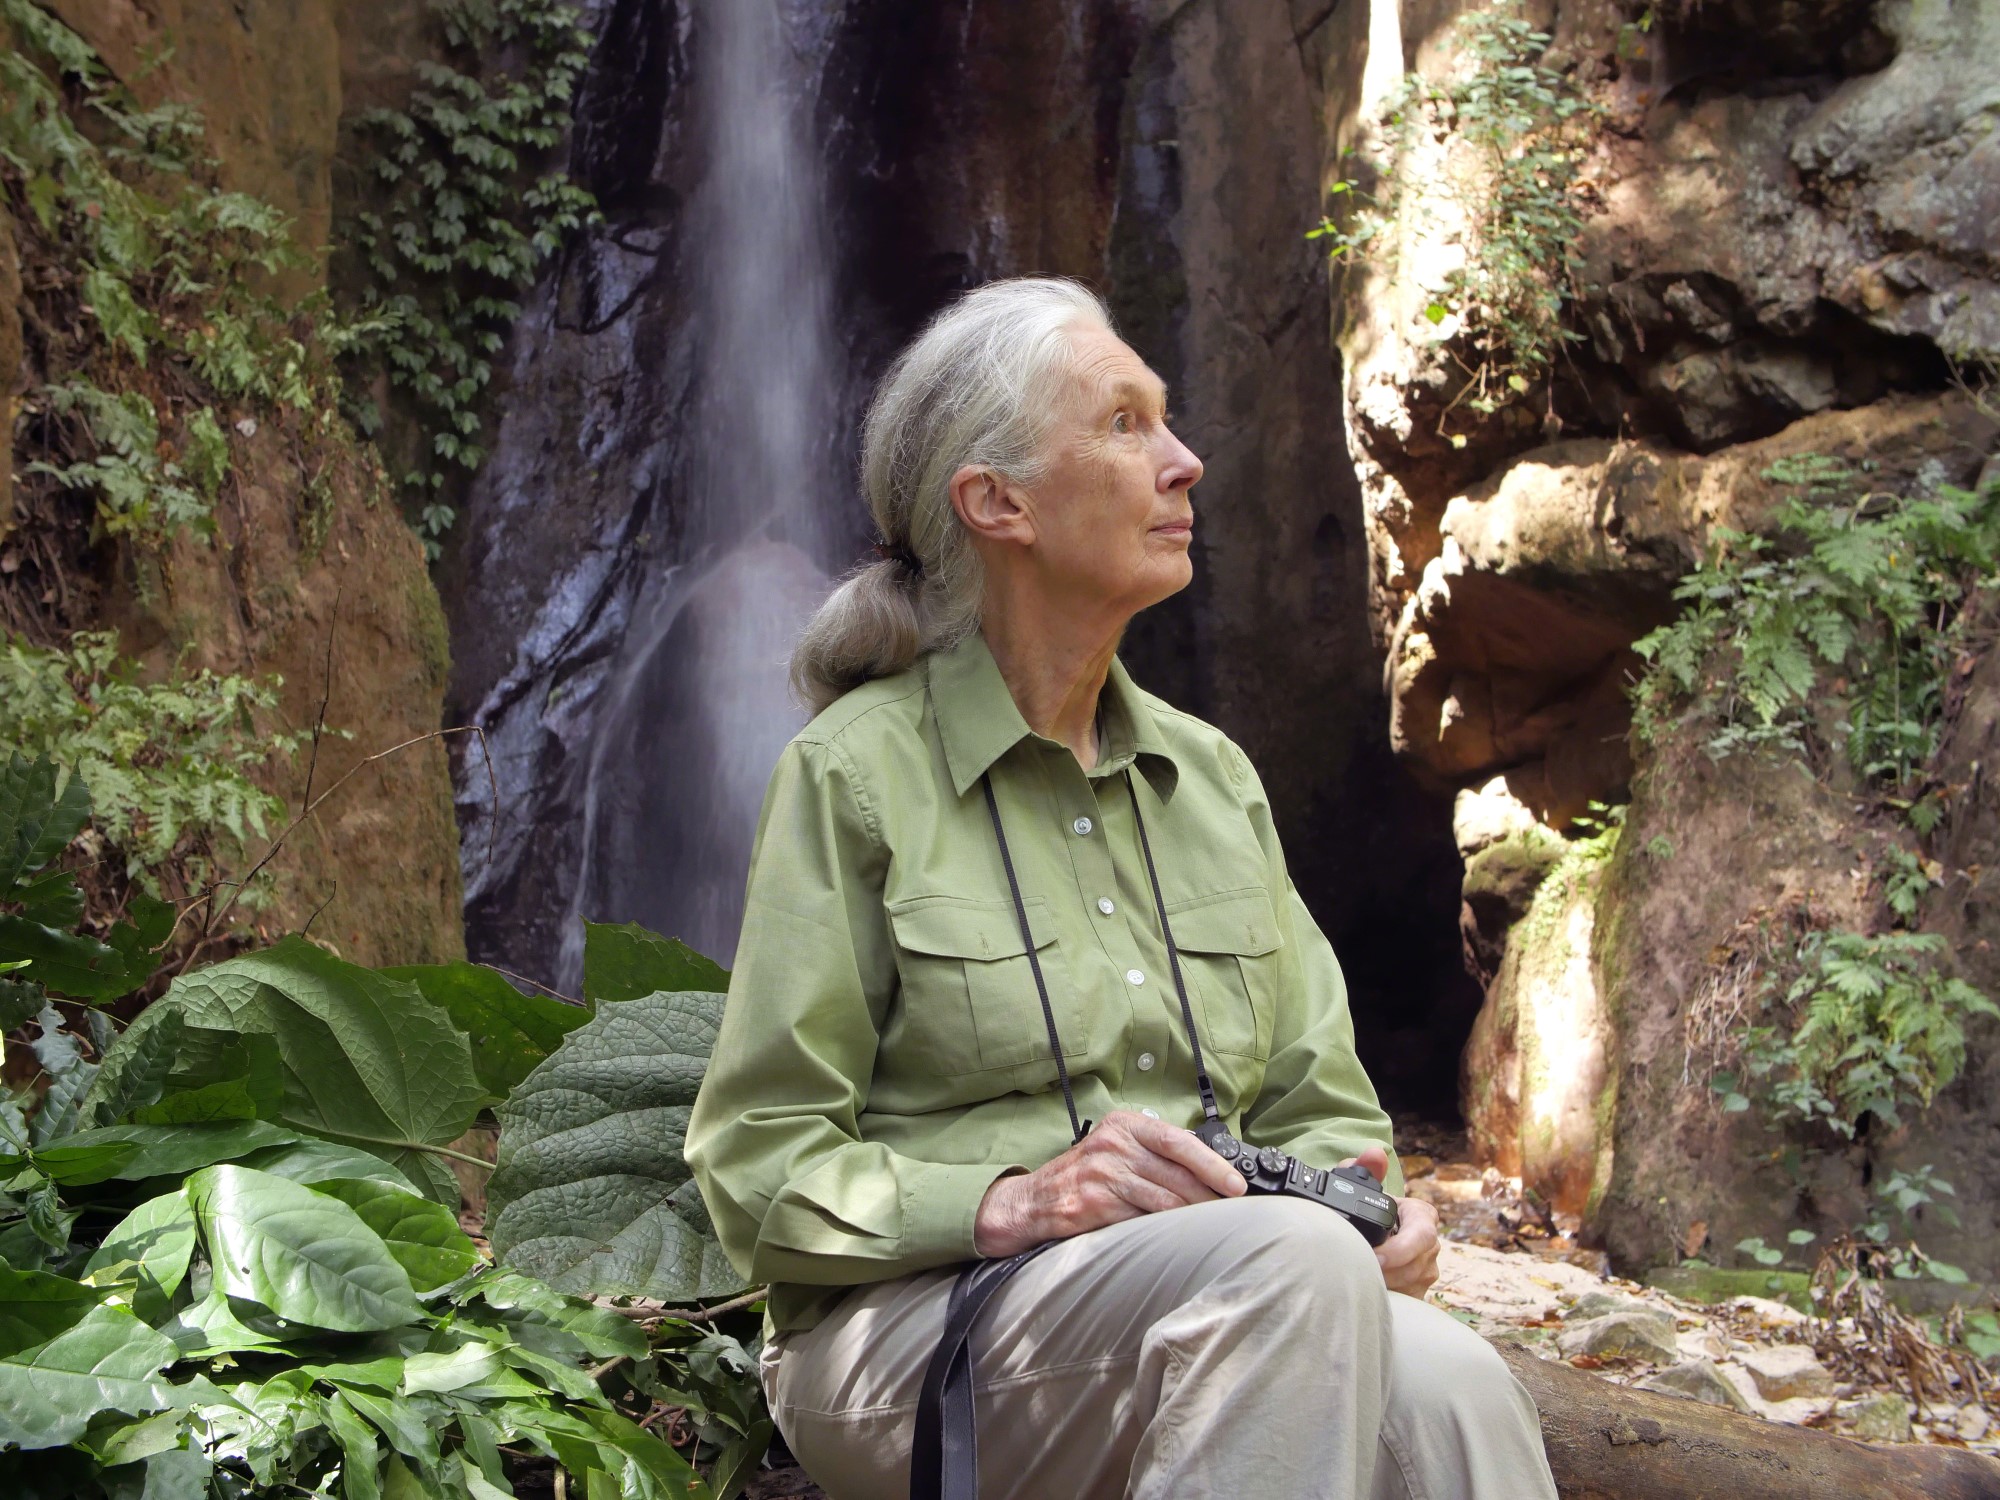 DR. JANE GOODALL, DBE, Legendary scientist, ethologist, conservationist and messenger of peace